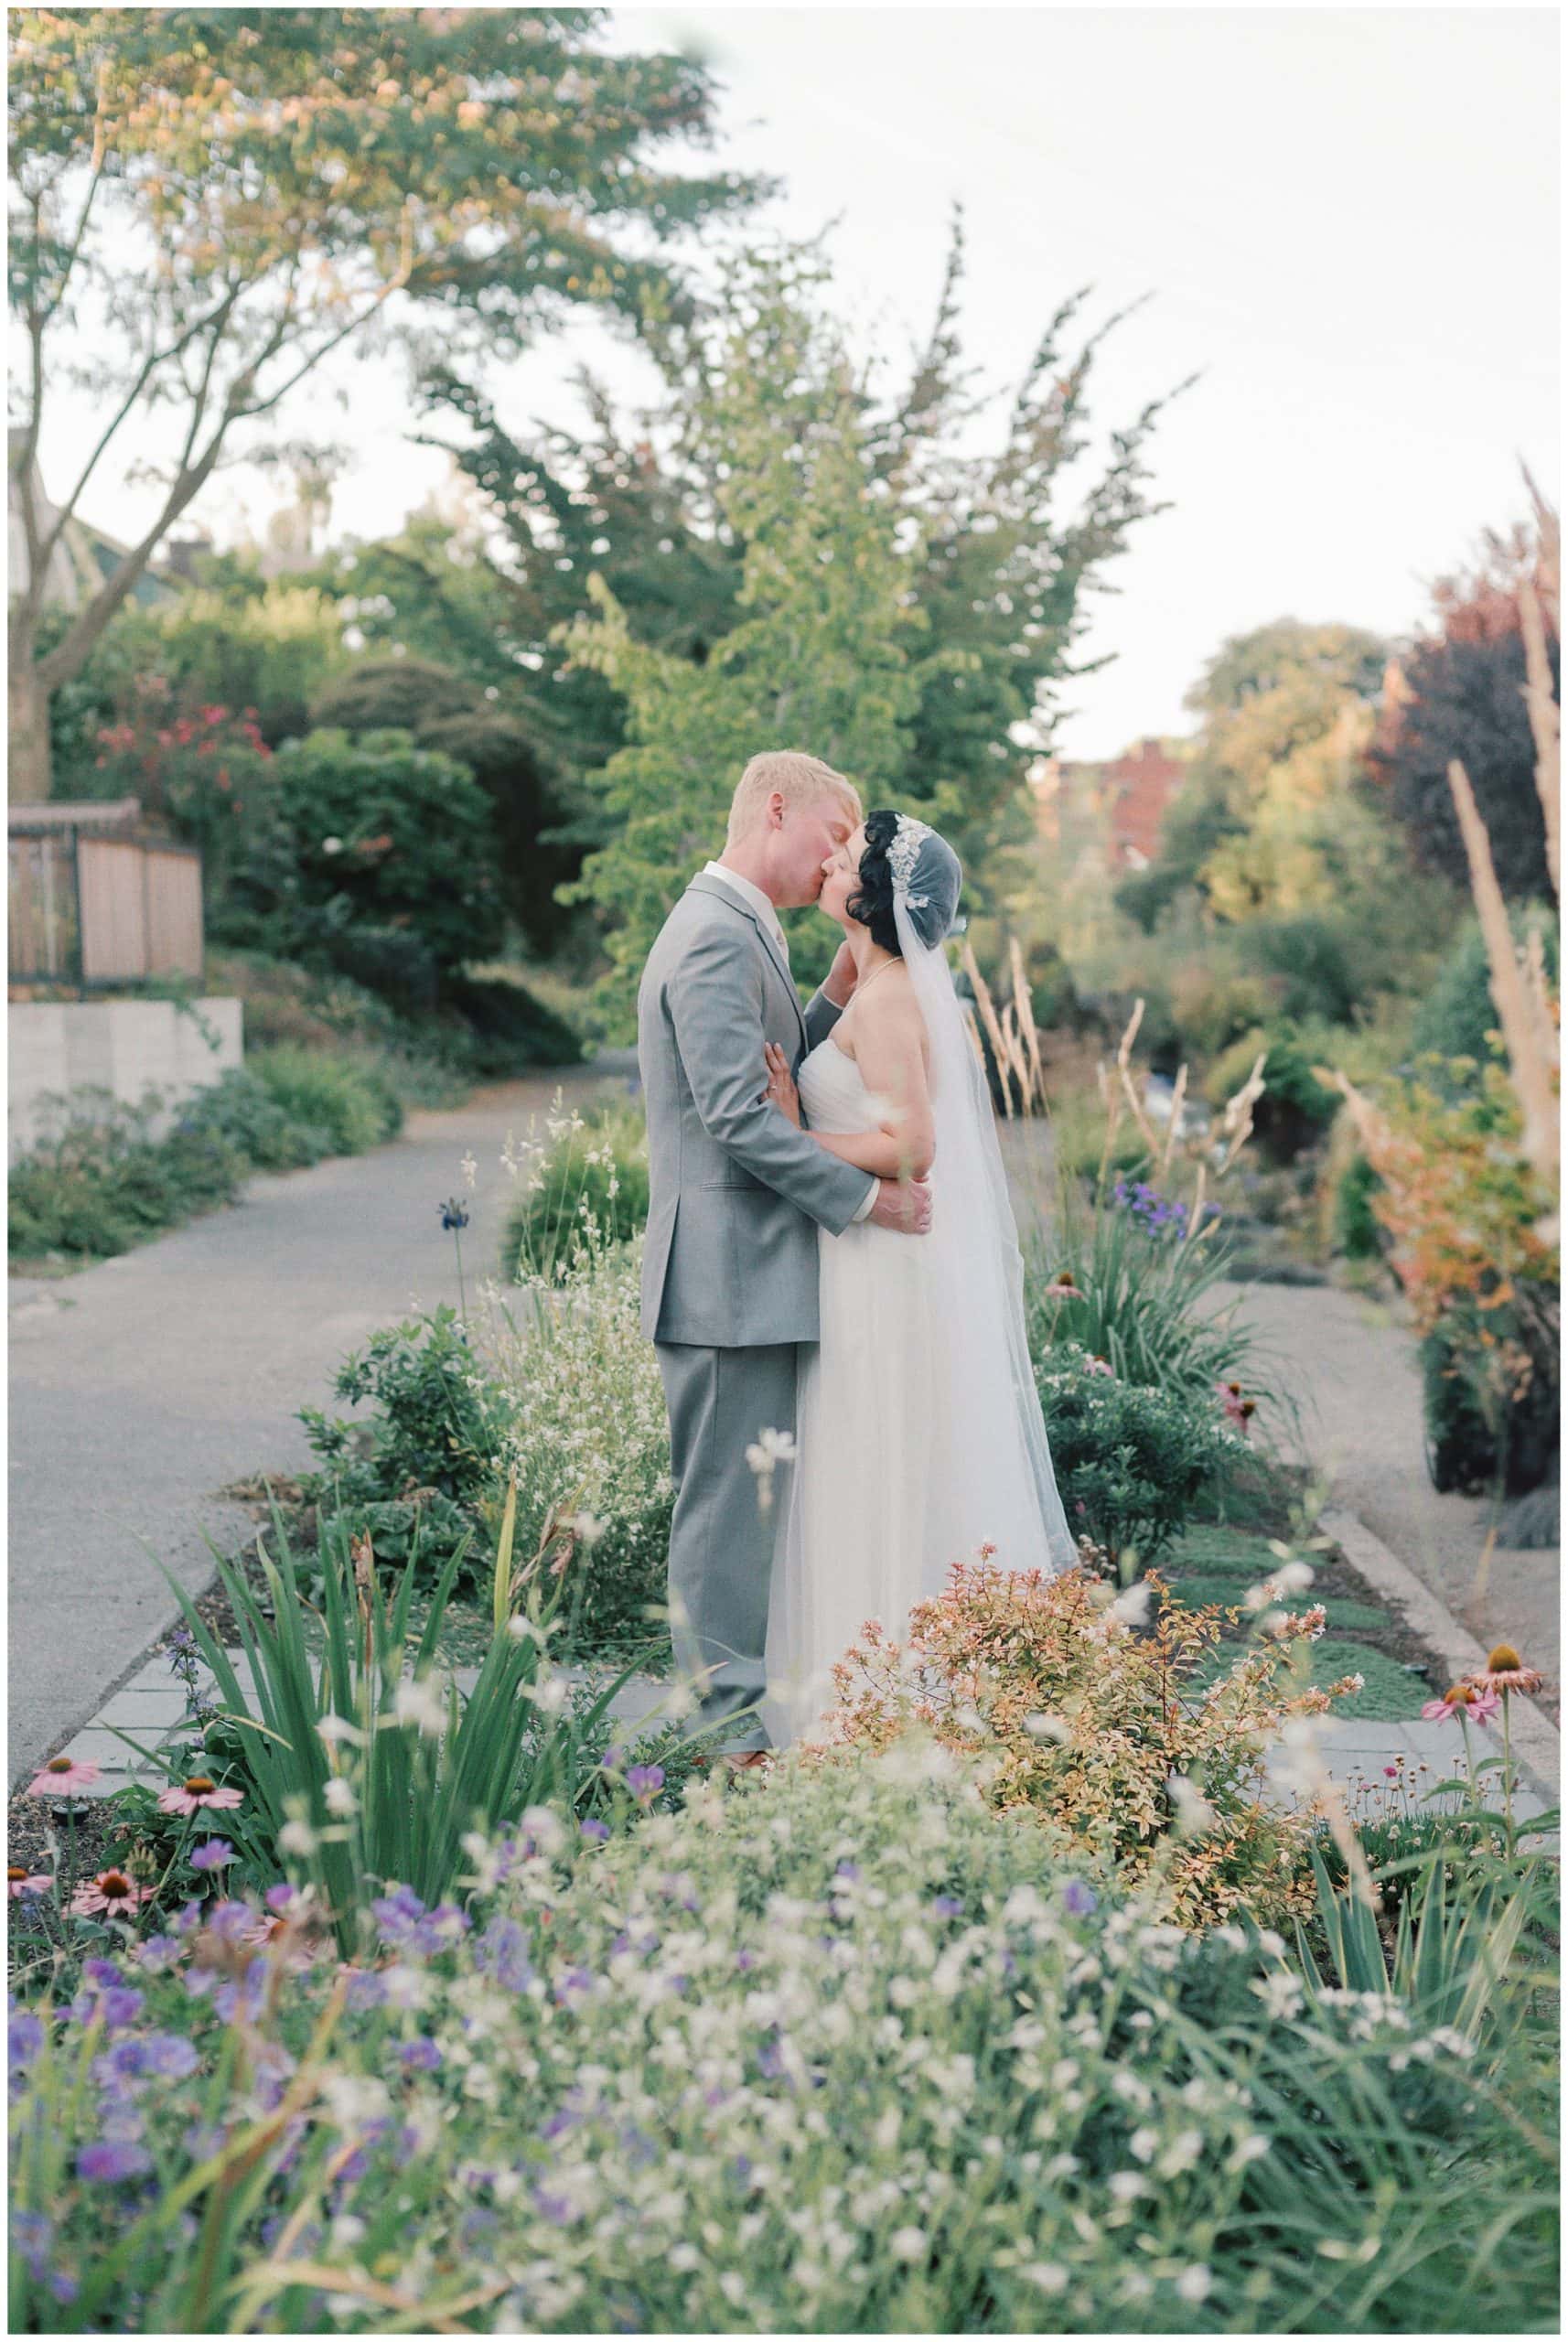 Newlyweds kiss while standing in a flower garden Seattle Small Wedding Venues